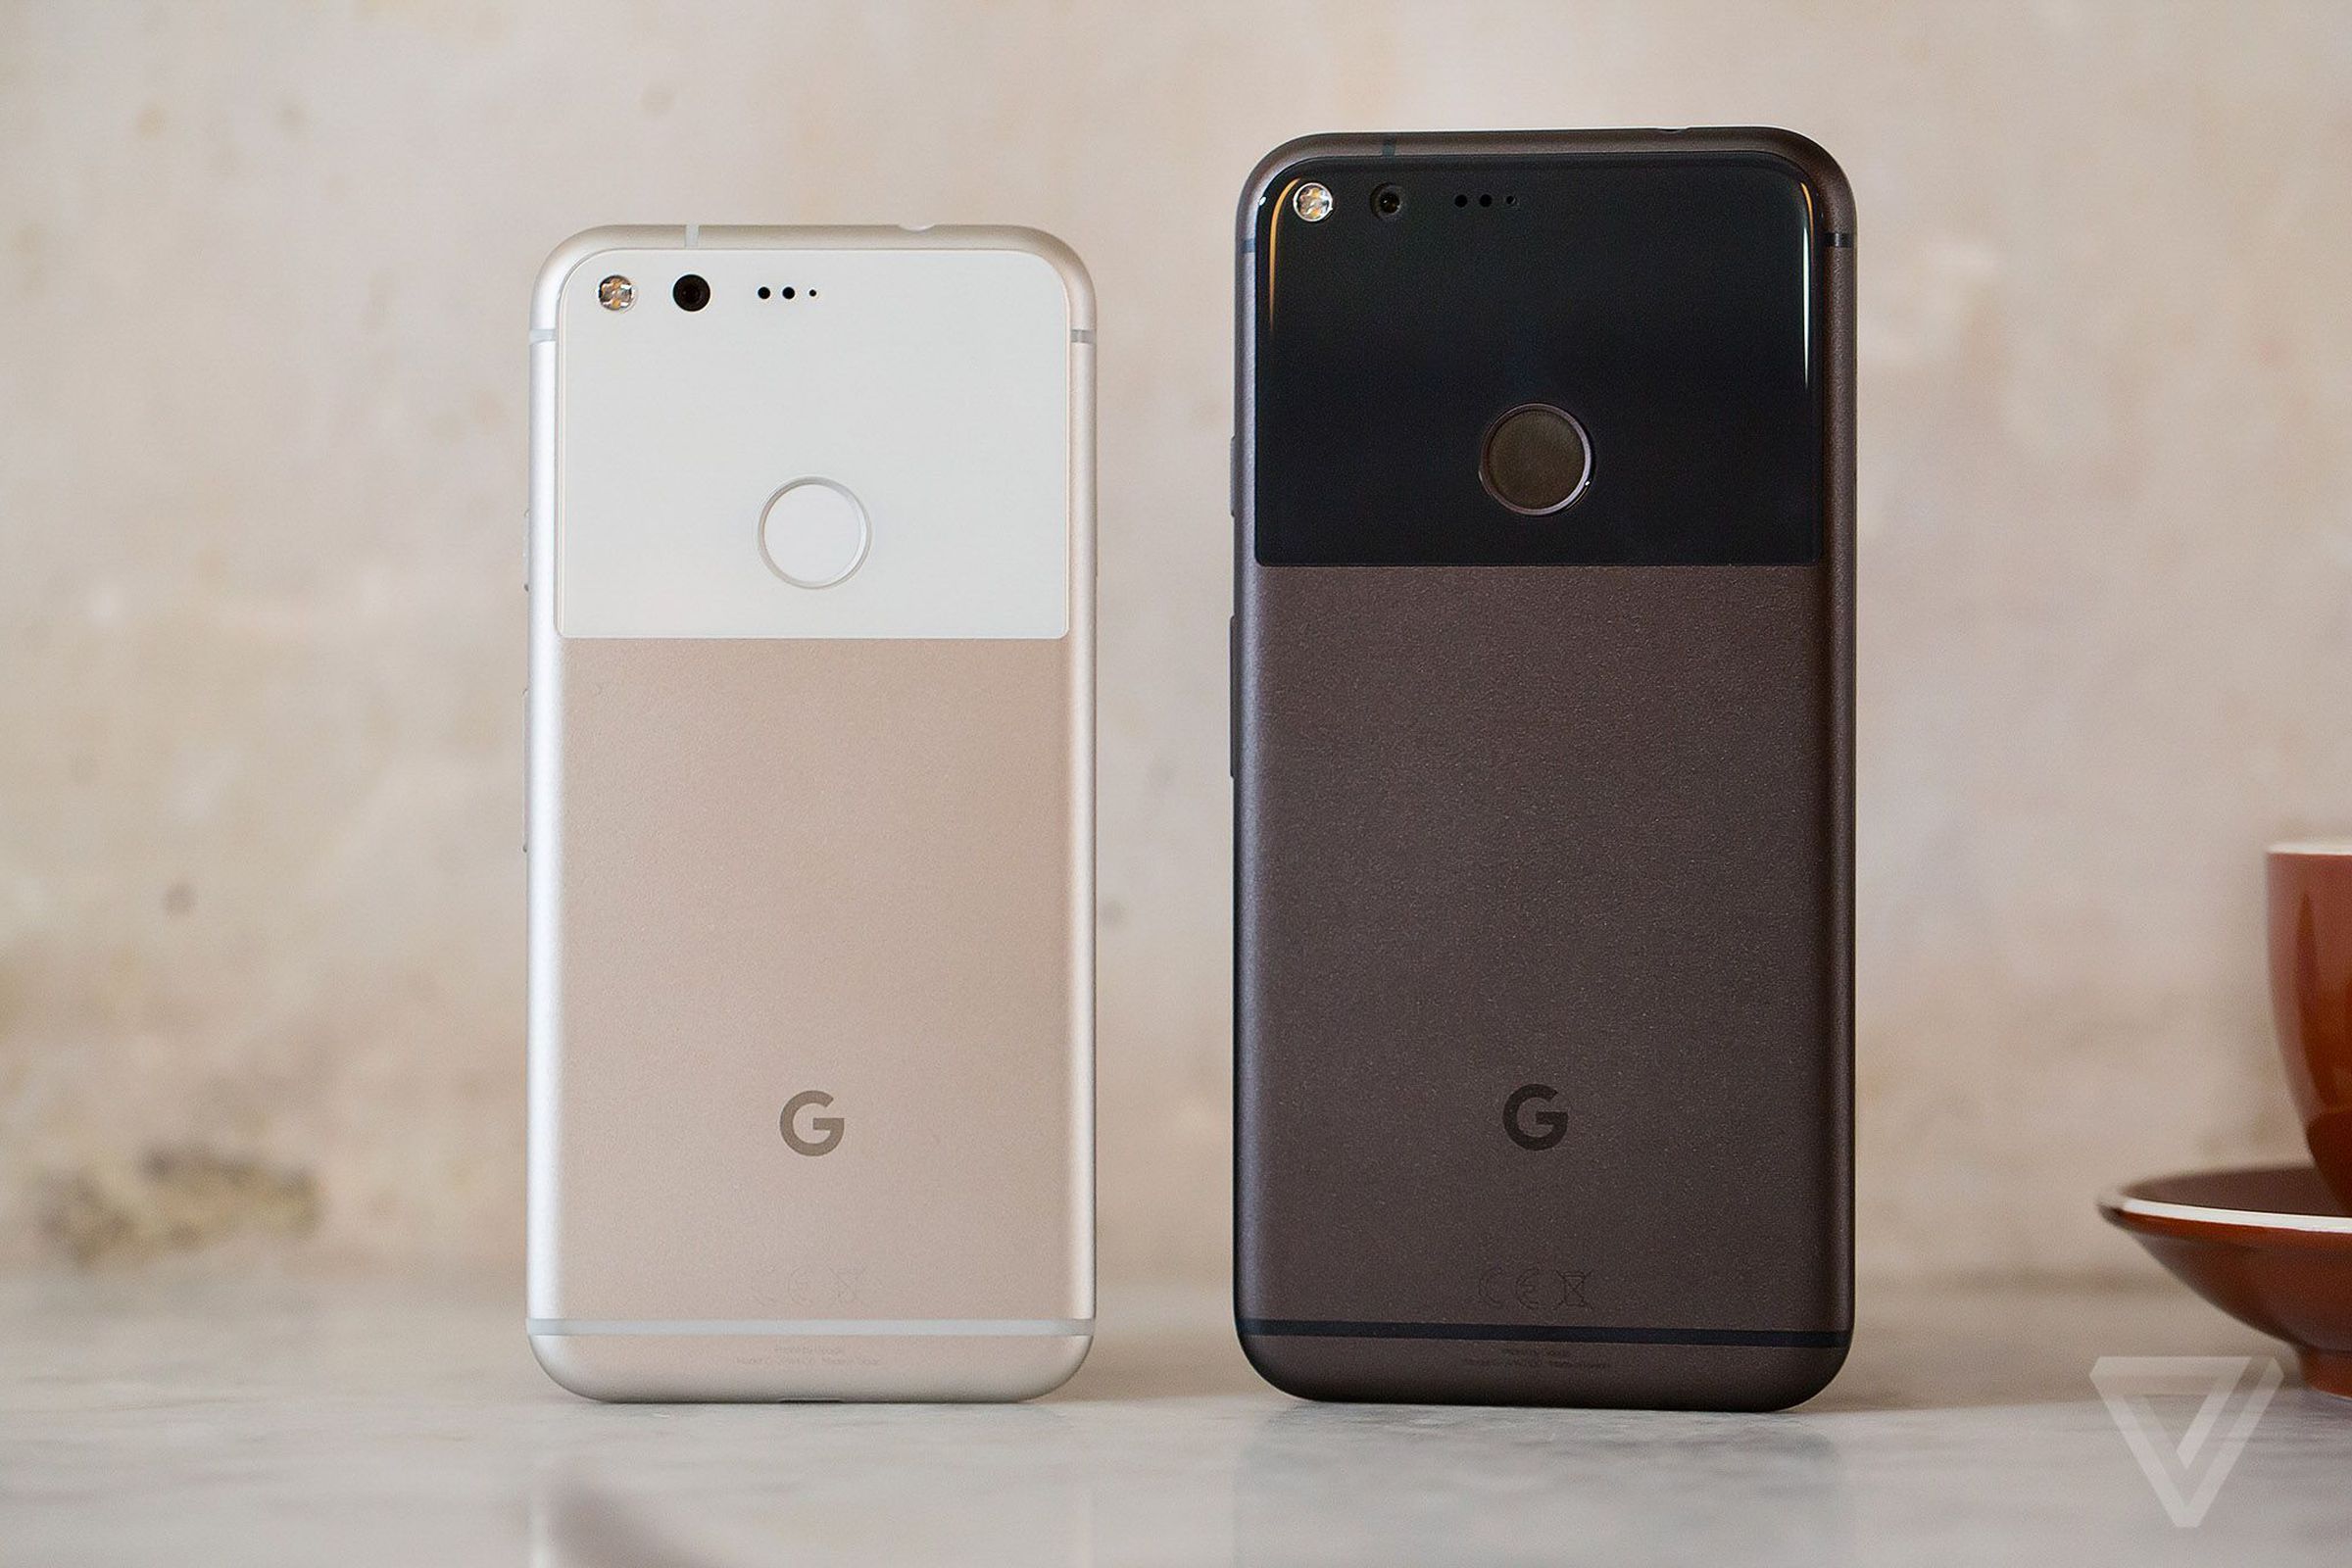 The 5.5-inch Pixel XL looped into this deal is the phone on the right.